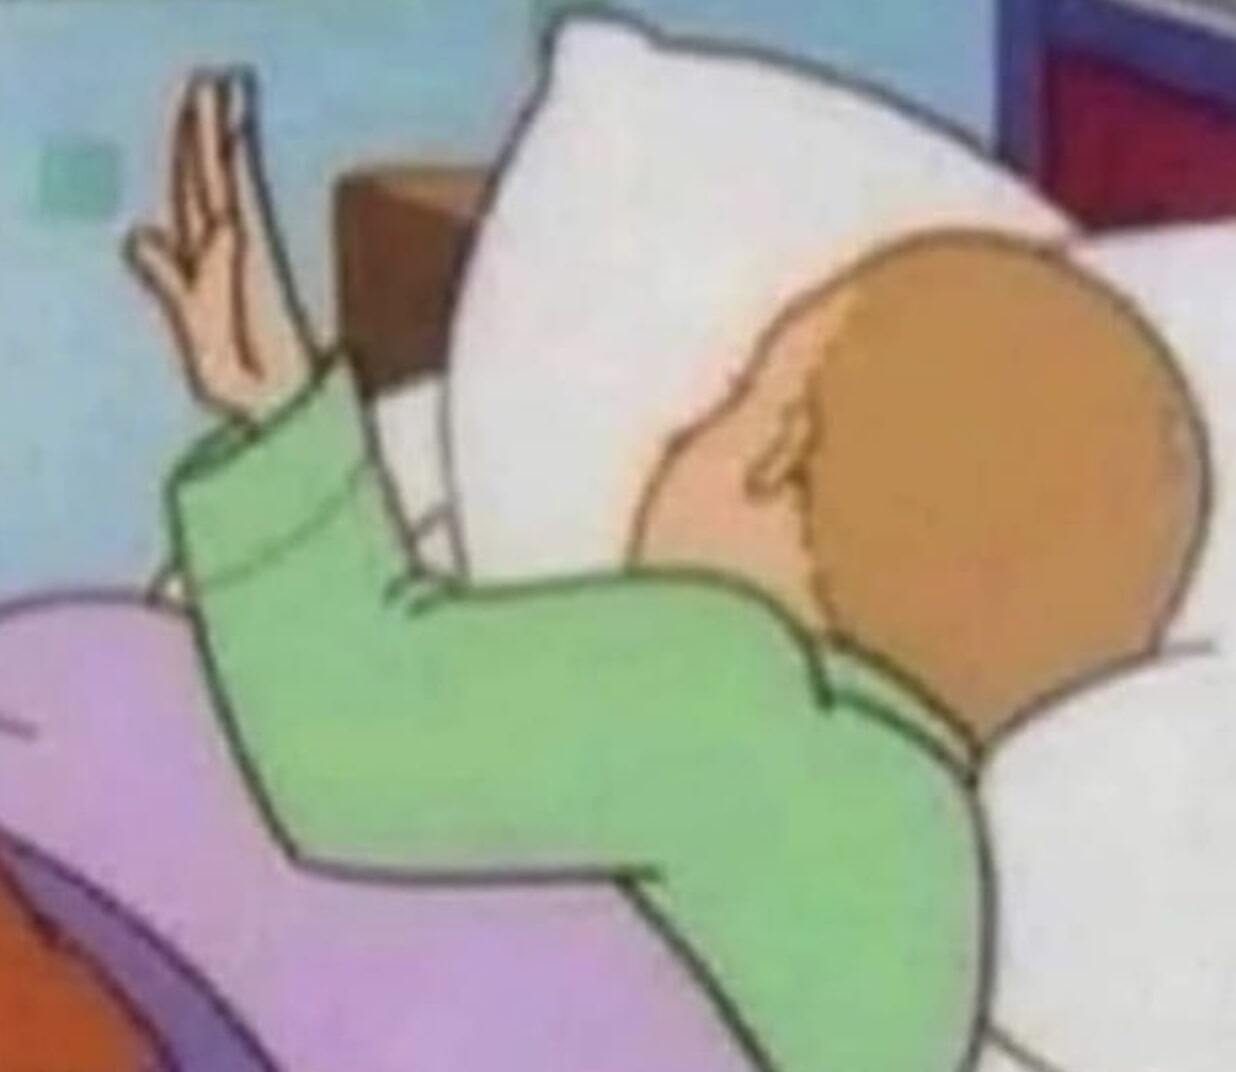 Bobby Hill lying in bed and holding up his hand